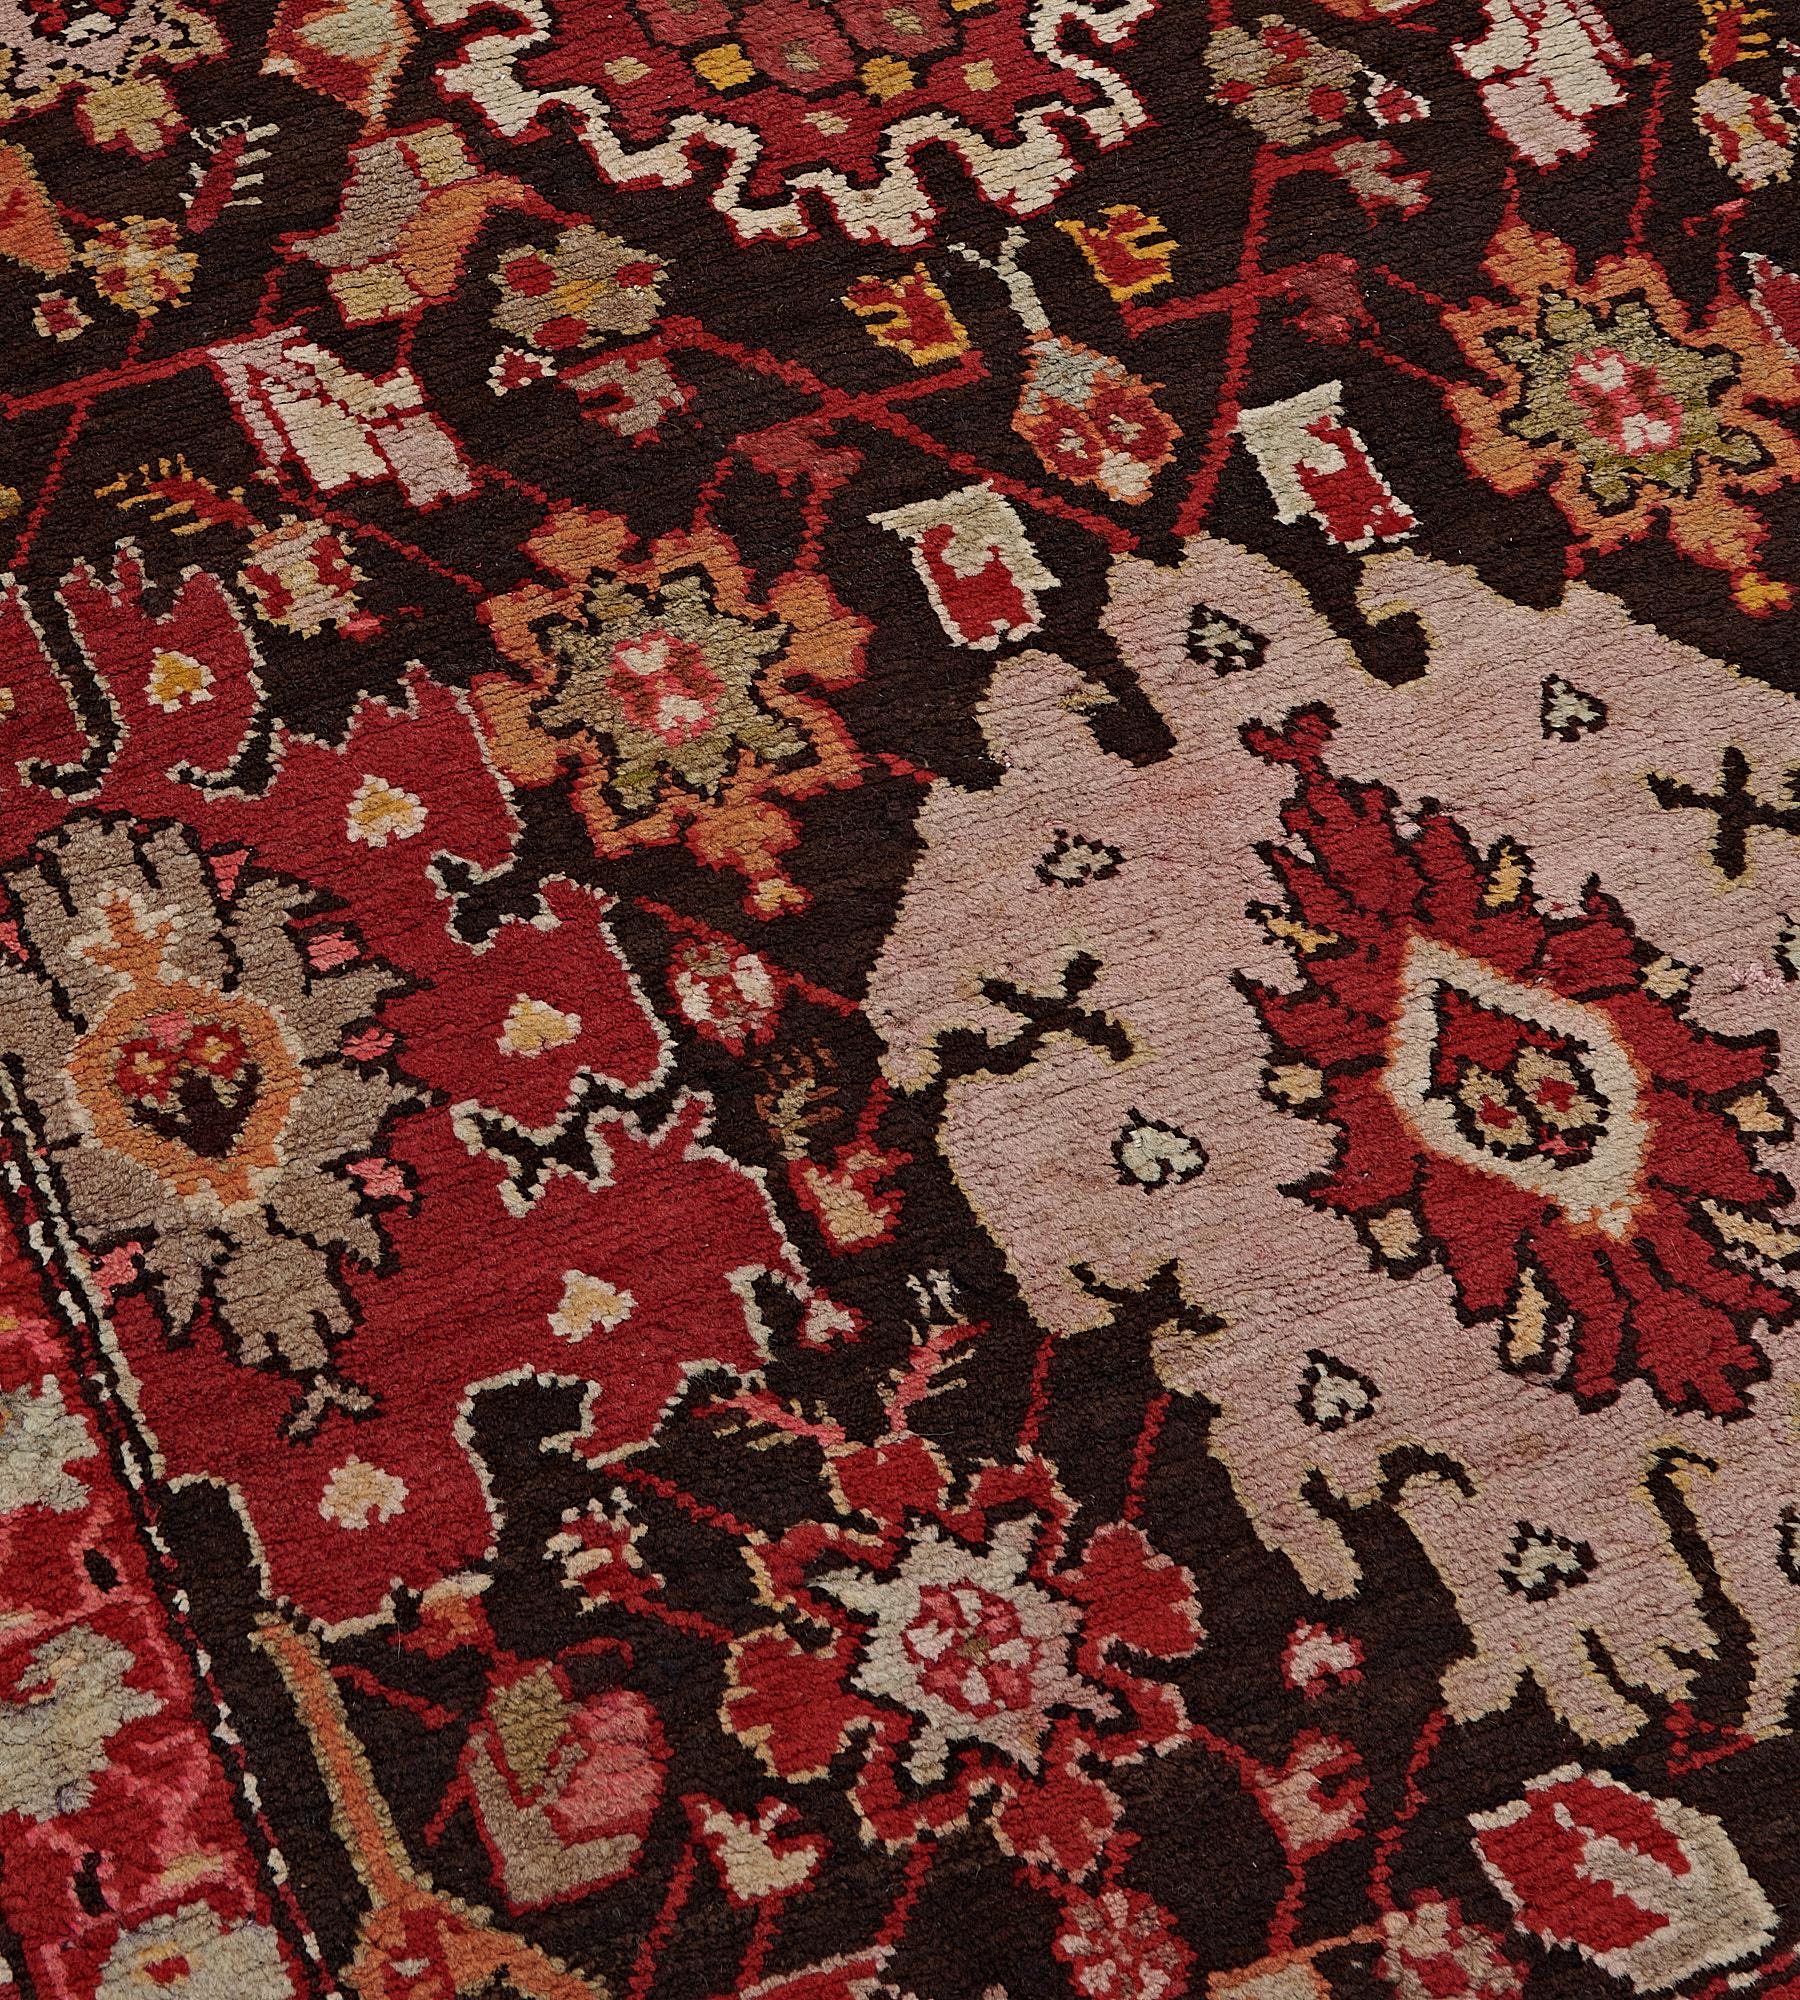 This antique, circa 1900, Karabagh runner has a chocolate-brown field with an overall design of polychrome bold palmettes linked by angular floral and palmette vine, in a brick-red narrow border of ice-blue floral sprays linked by angular floral